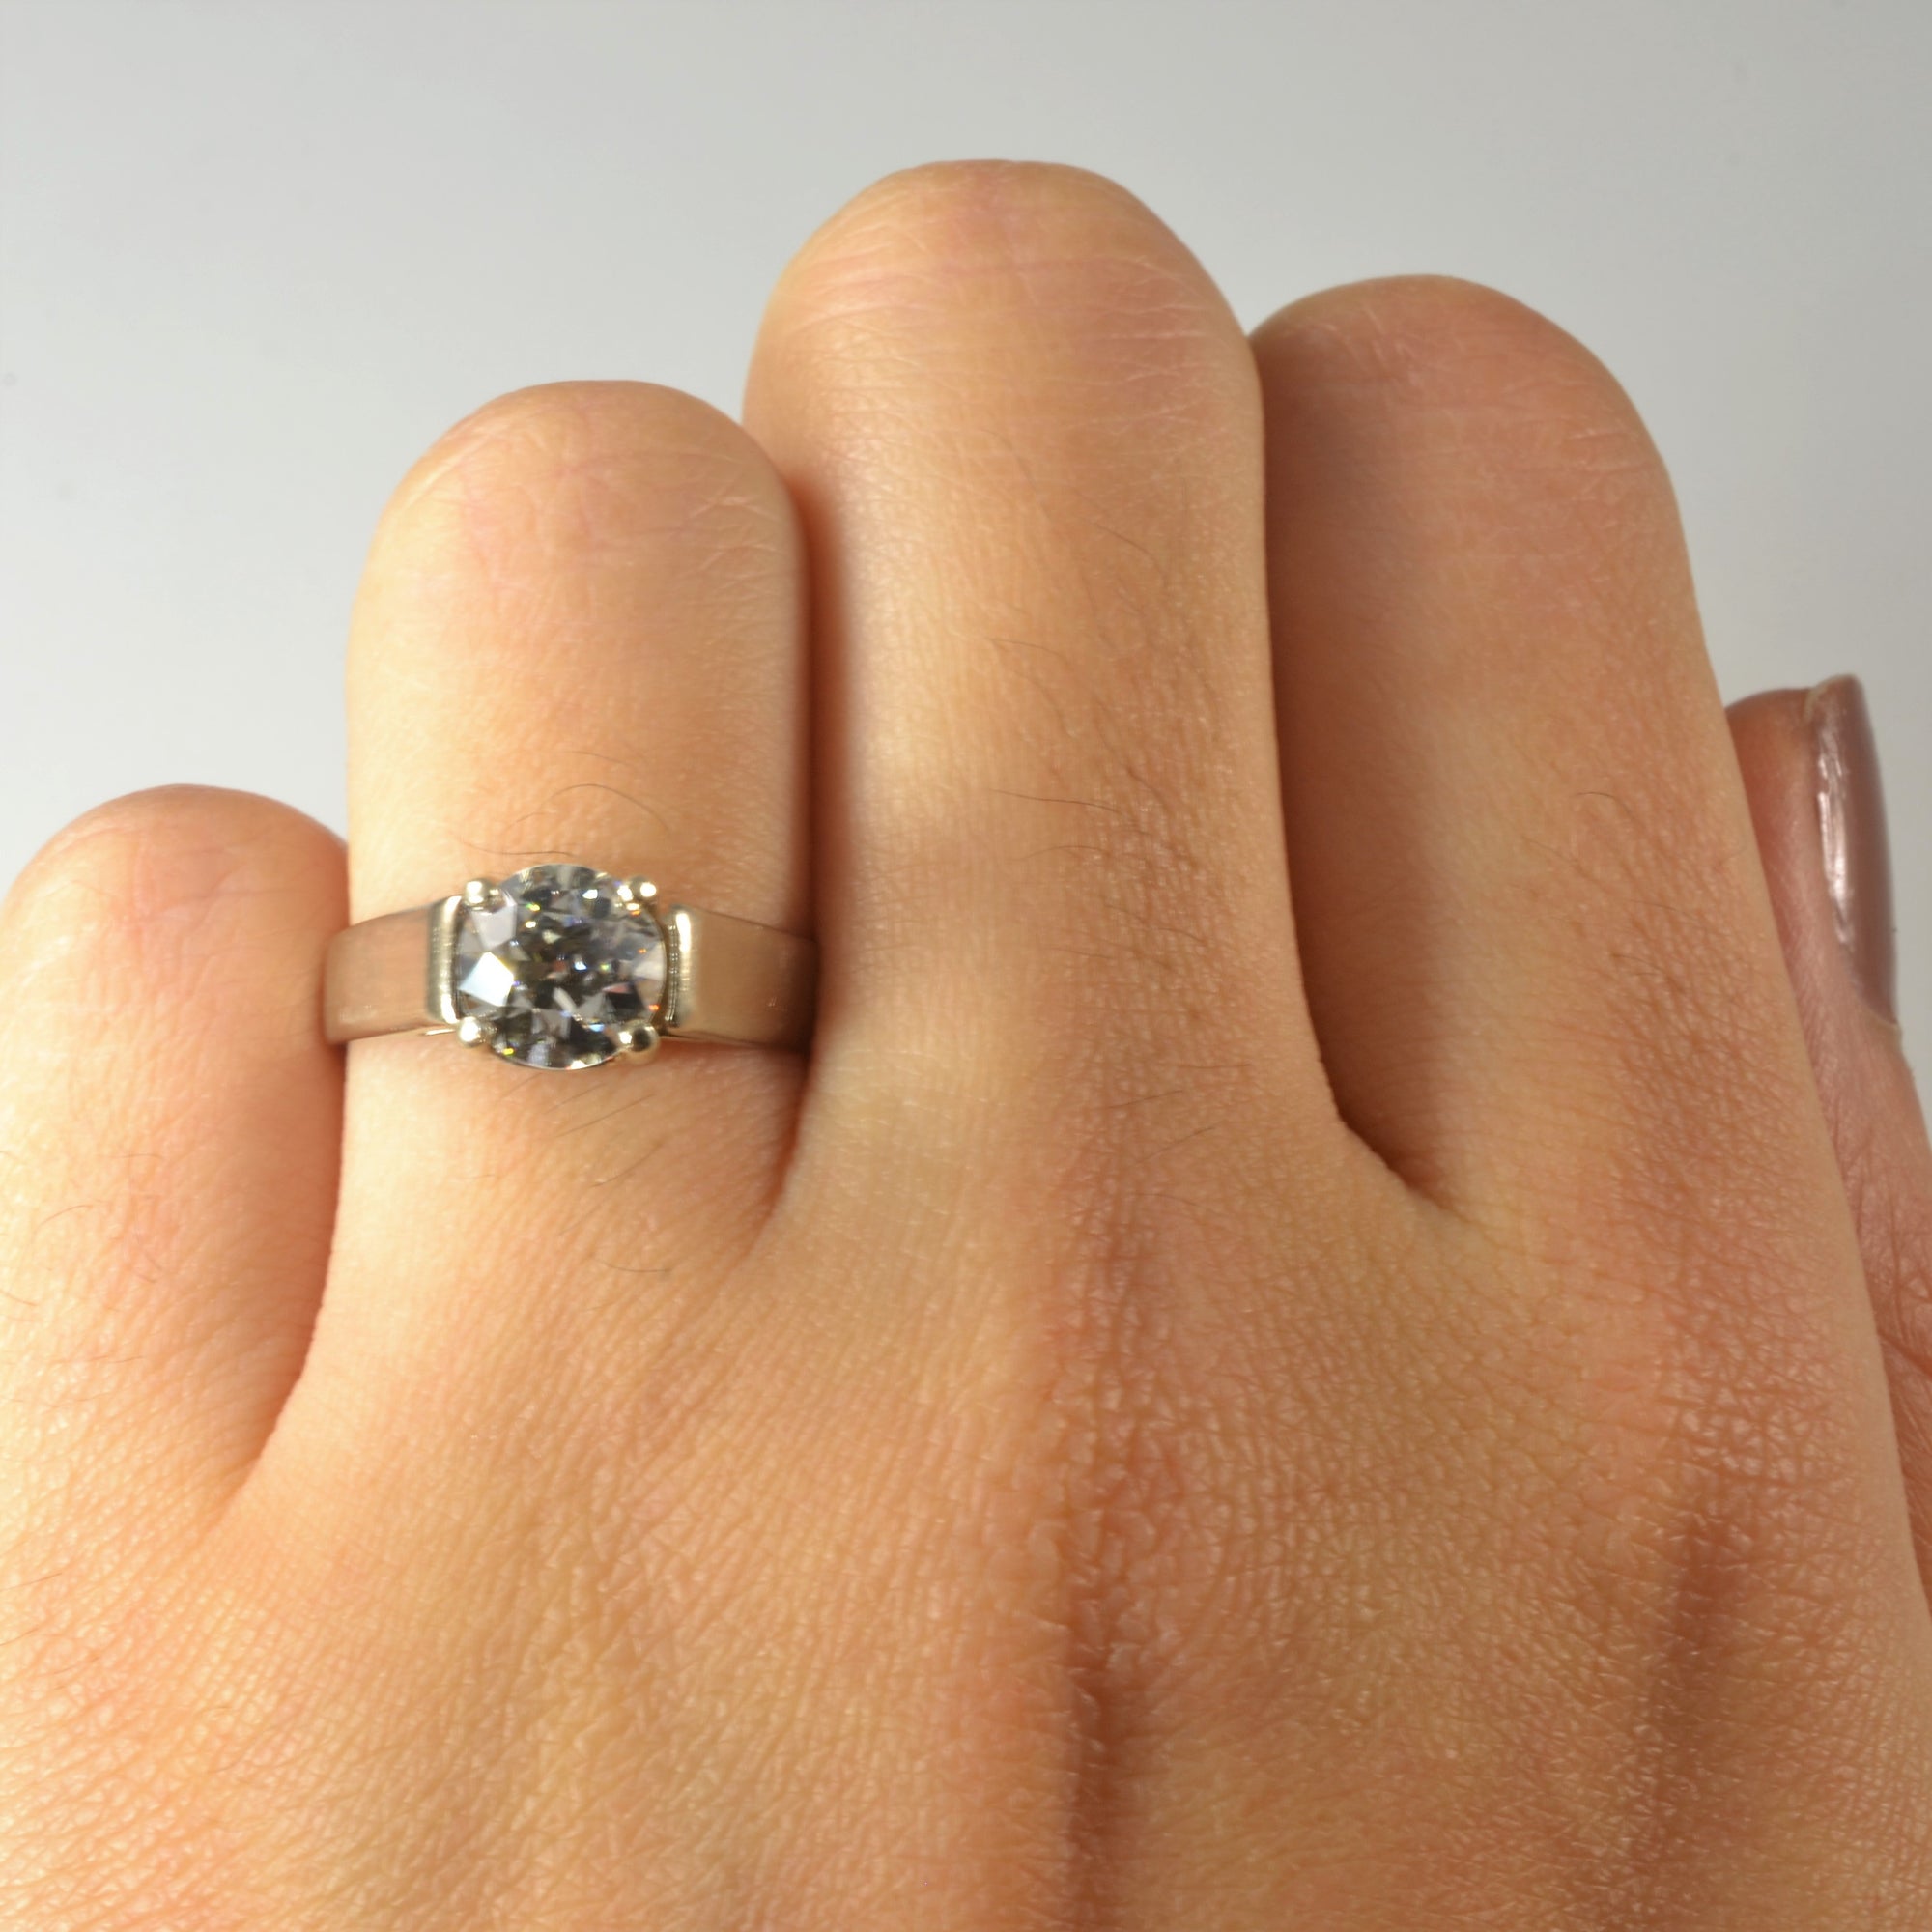 Tapered Old European Solitaire Diamond Ring | 1.18ct | SZ 6.25 |